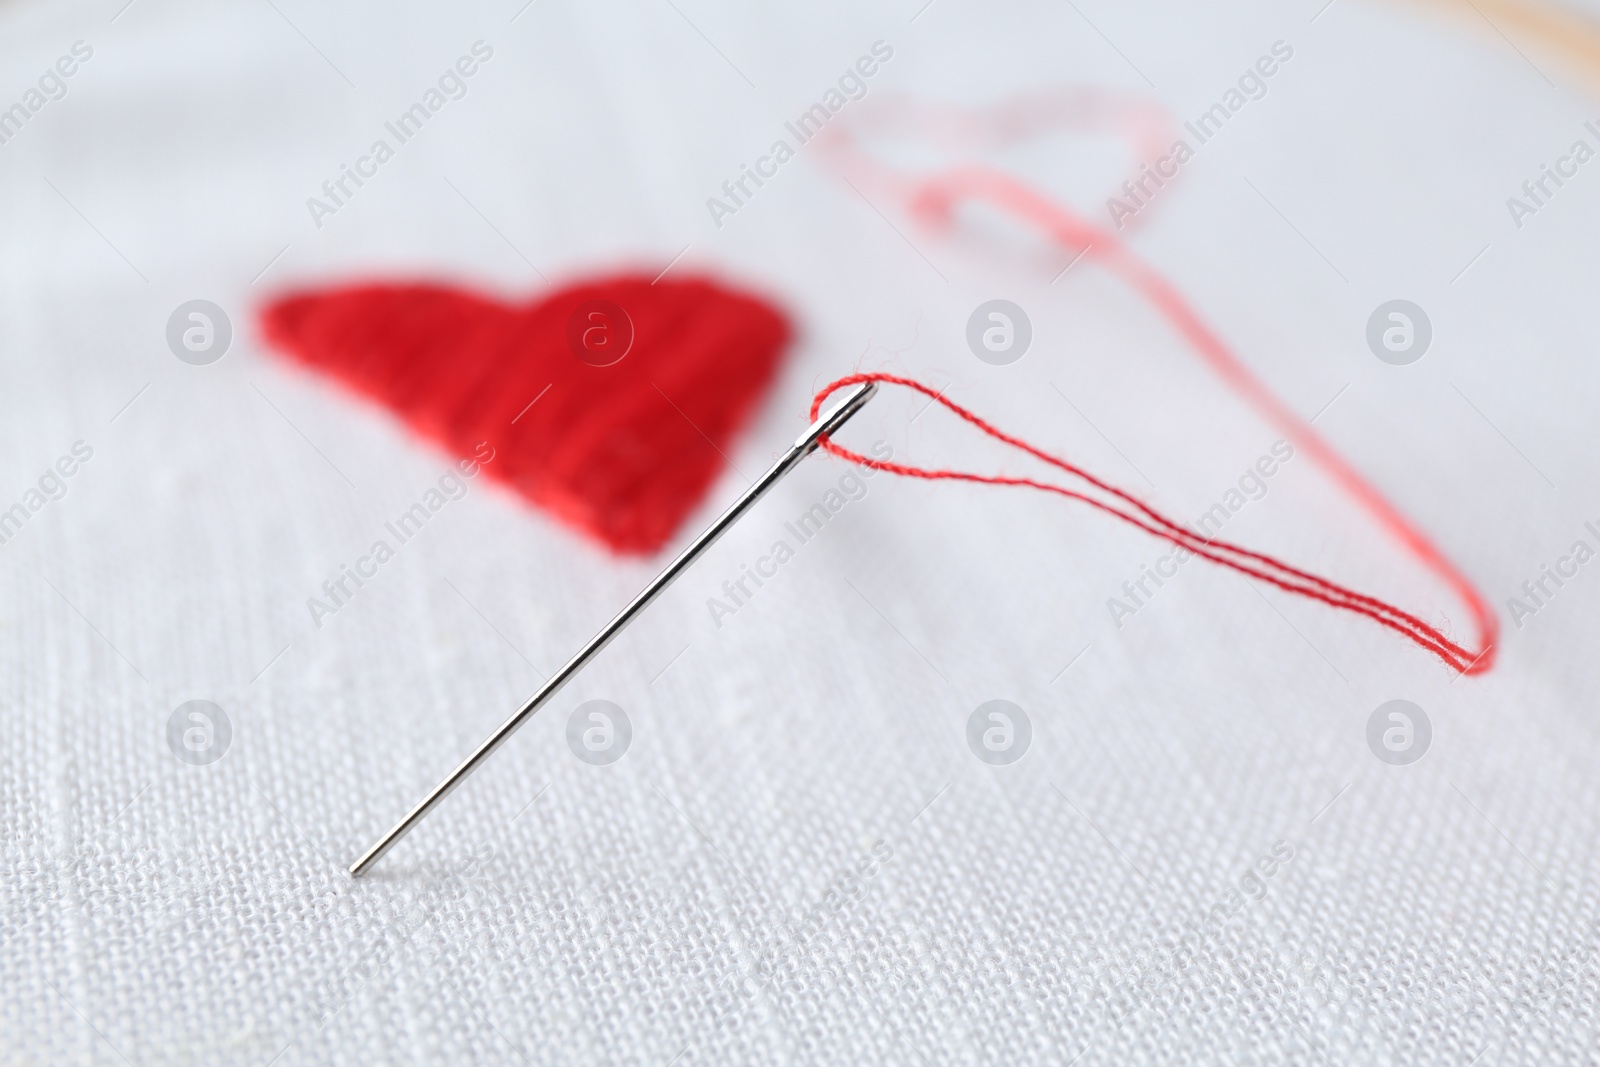 Photo of Embroidered red hearts and needle on white cloth, closeup